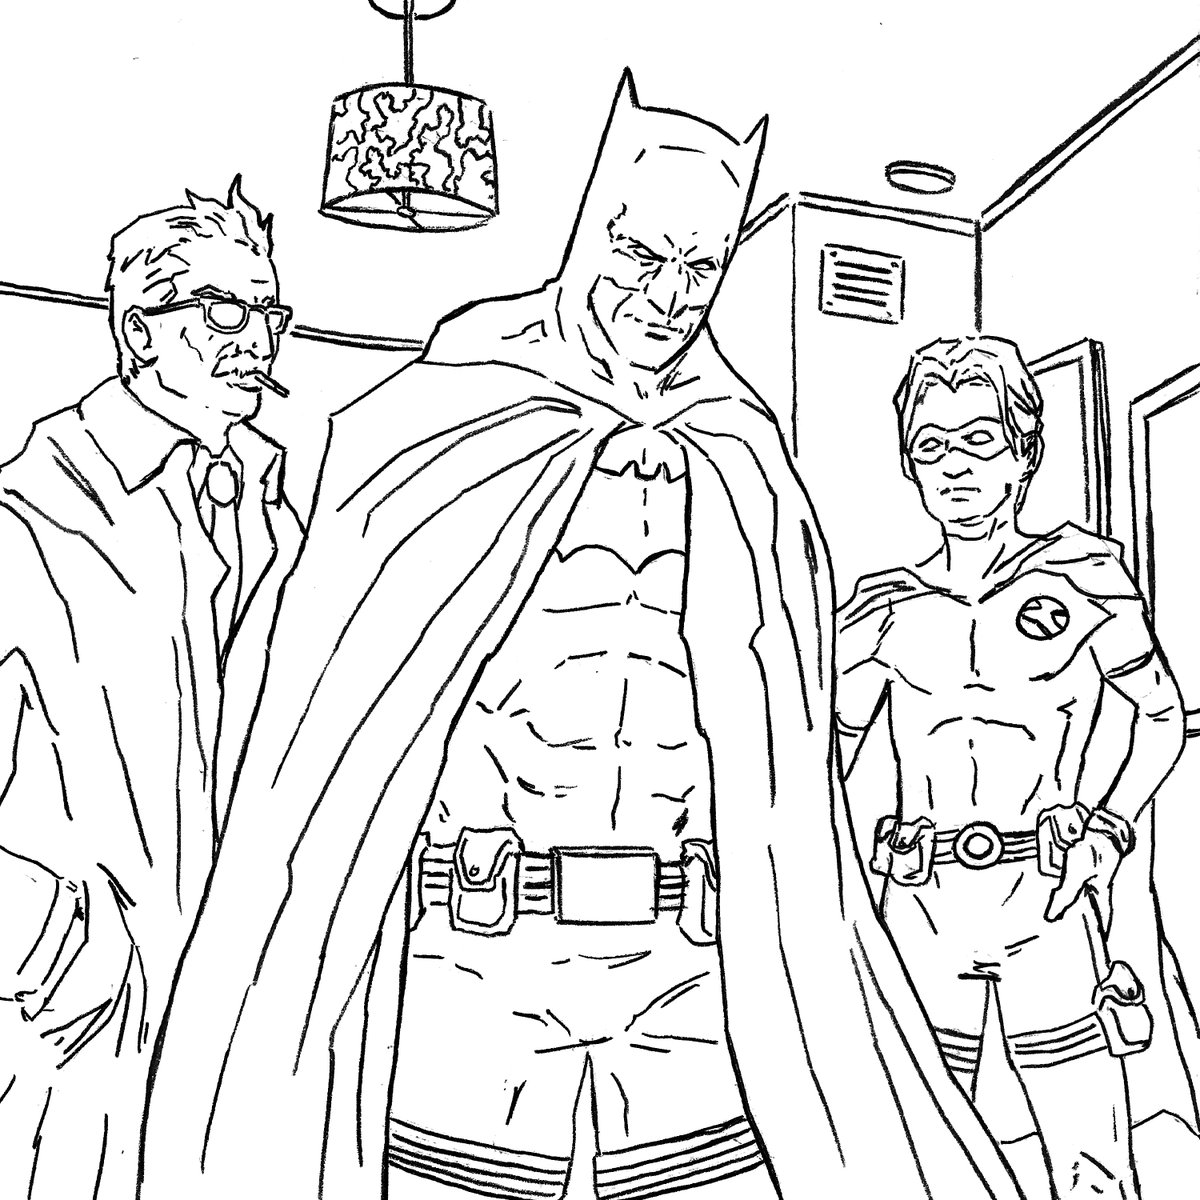 I've been hard at work on my next comic, but was having one of those mornings where the only thing that would get the pencil moving was some good-old-fashion Batman and friends doodling. #Batman #Robin #JimGordon #dccomics #Comics